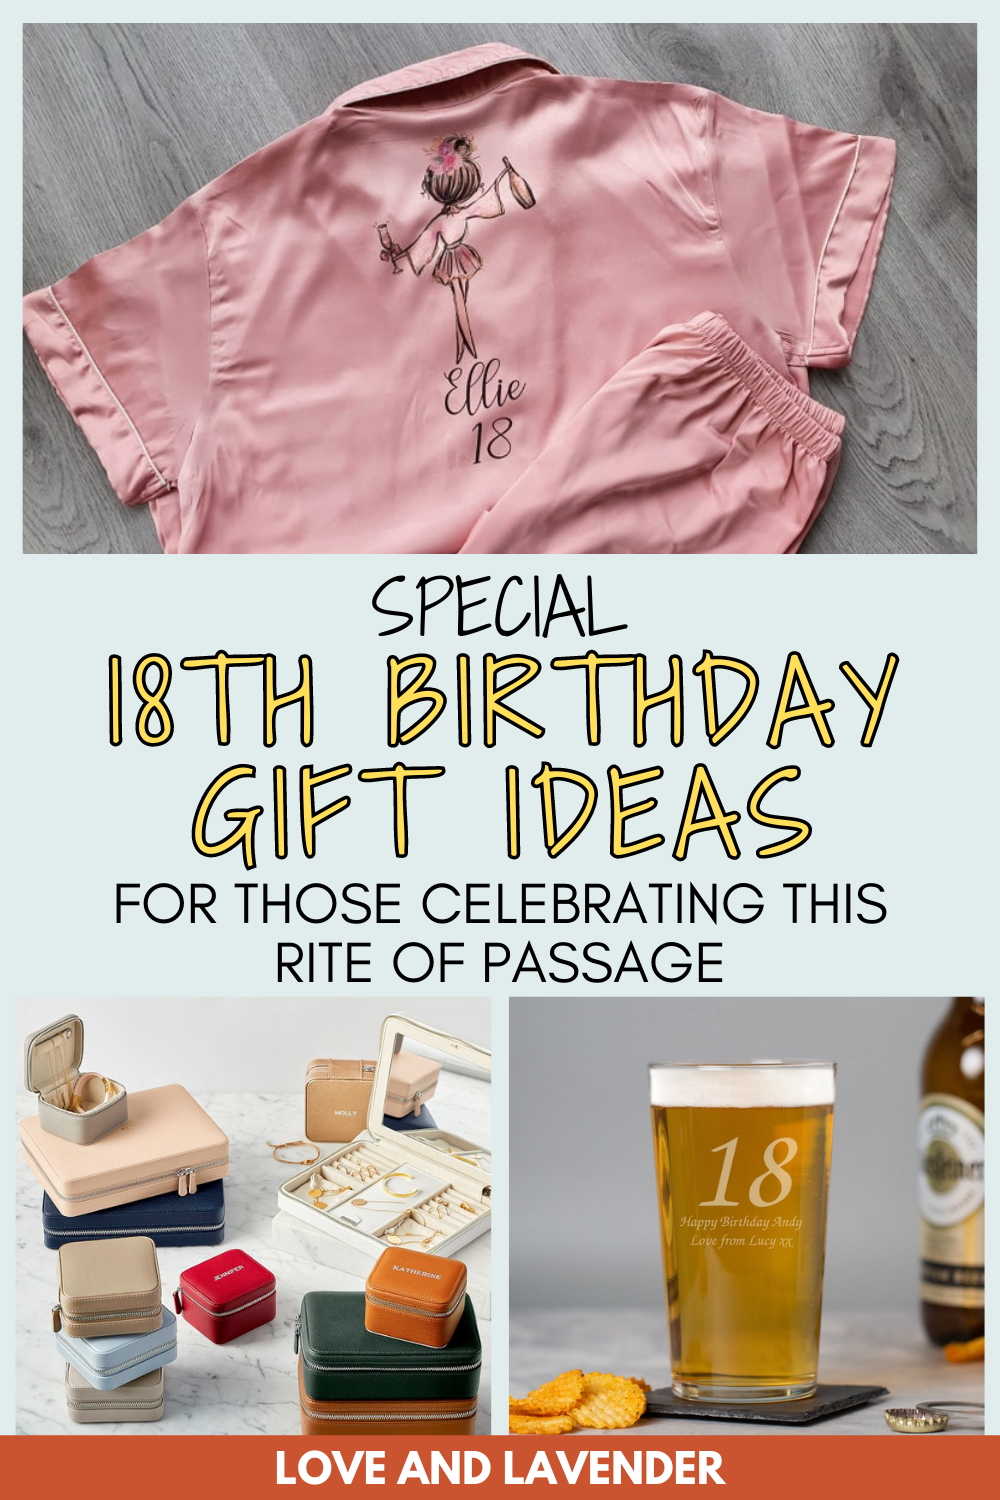 25 Special 18th Birthday Gift Ideas for Those Celebrating this Rite of Passage - Love & Lavender